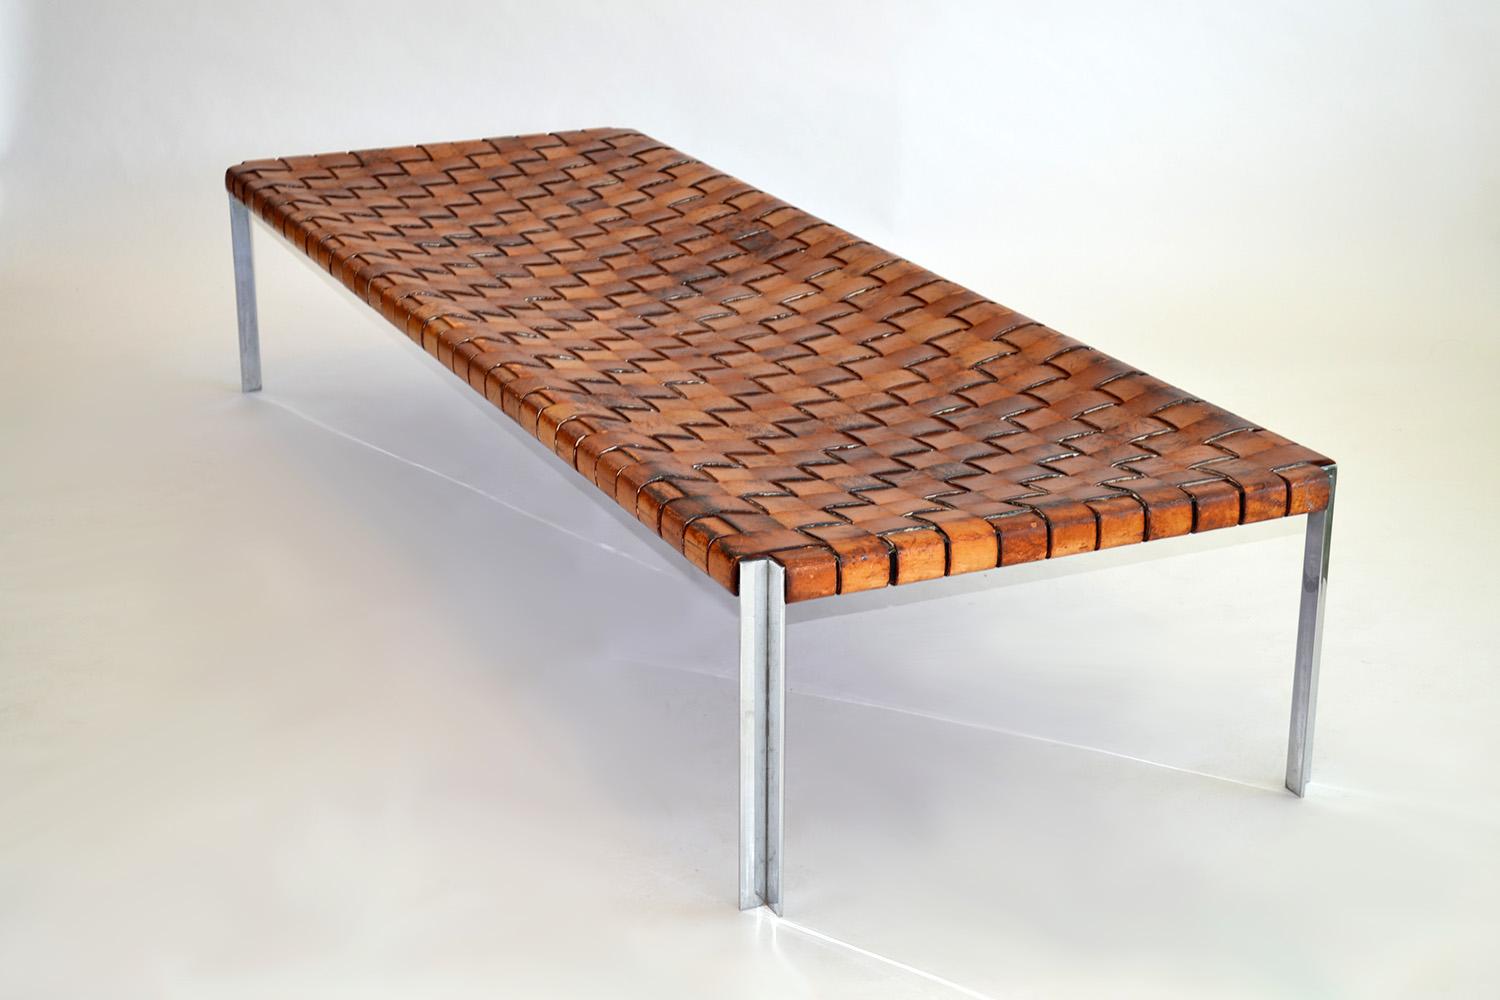 Vintage Woven Leather Long Bench by Katavalos Littell and Kelley Laverne c.1950s
The bench was designed by Katavolos, Littell and Kelley in 1952 as part of the original Laverne Collection This example c. 1955. Woven thick leather straps on a